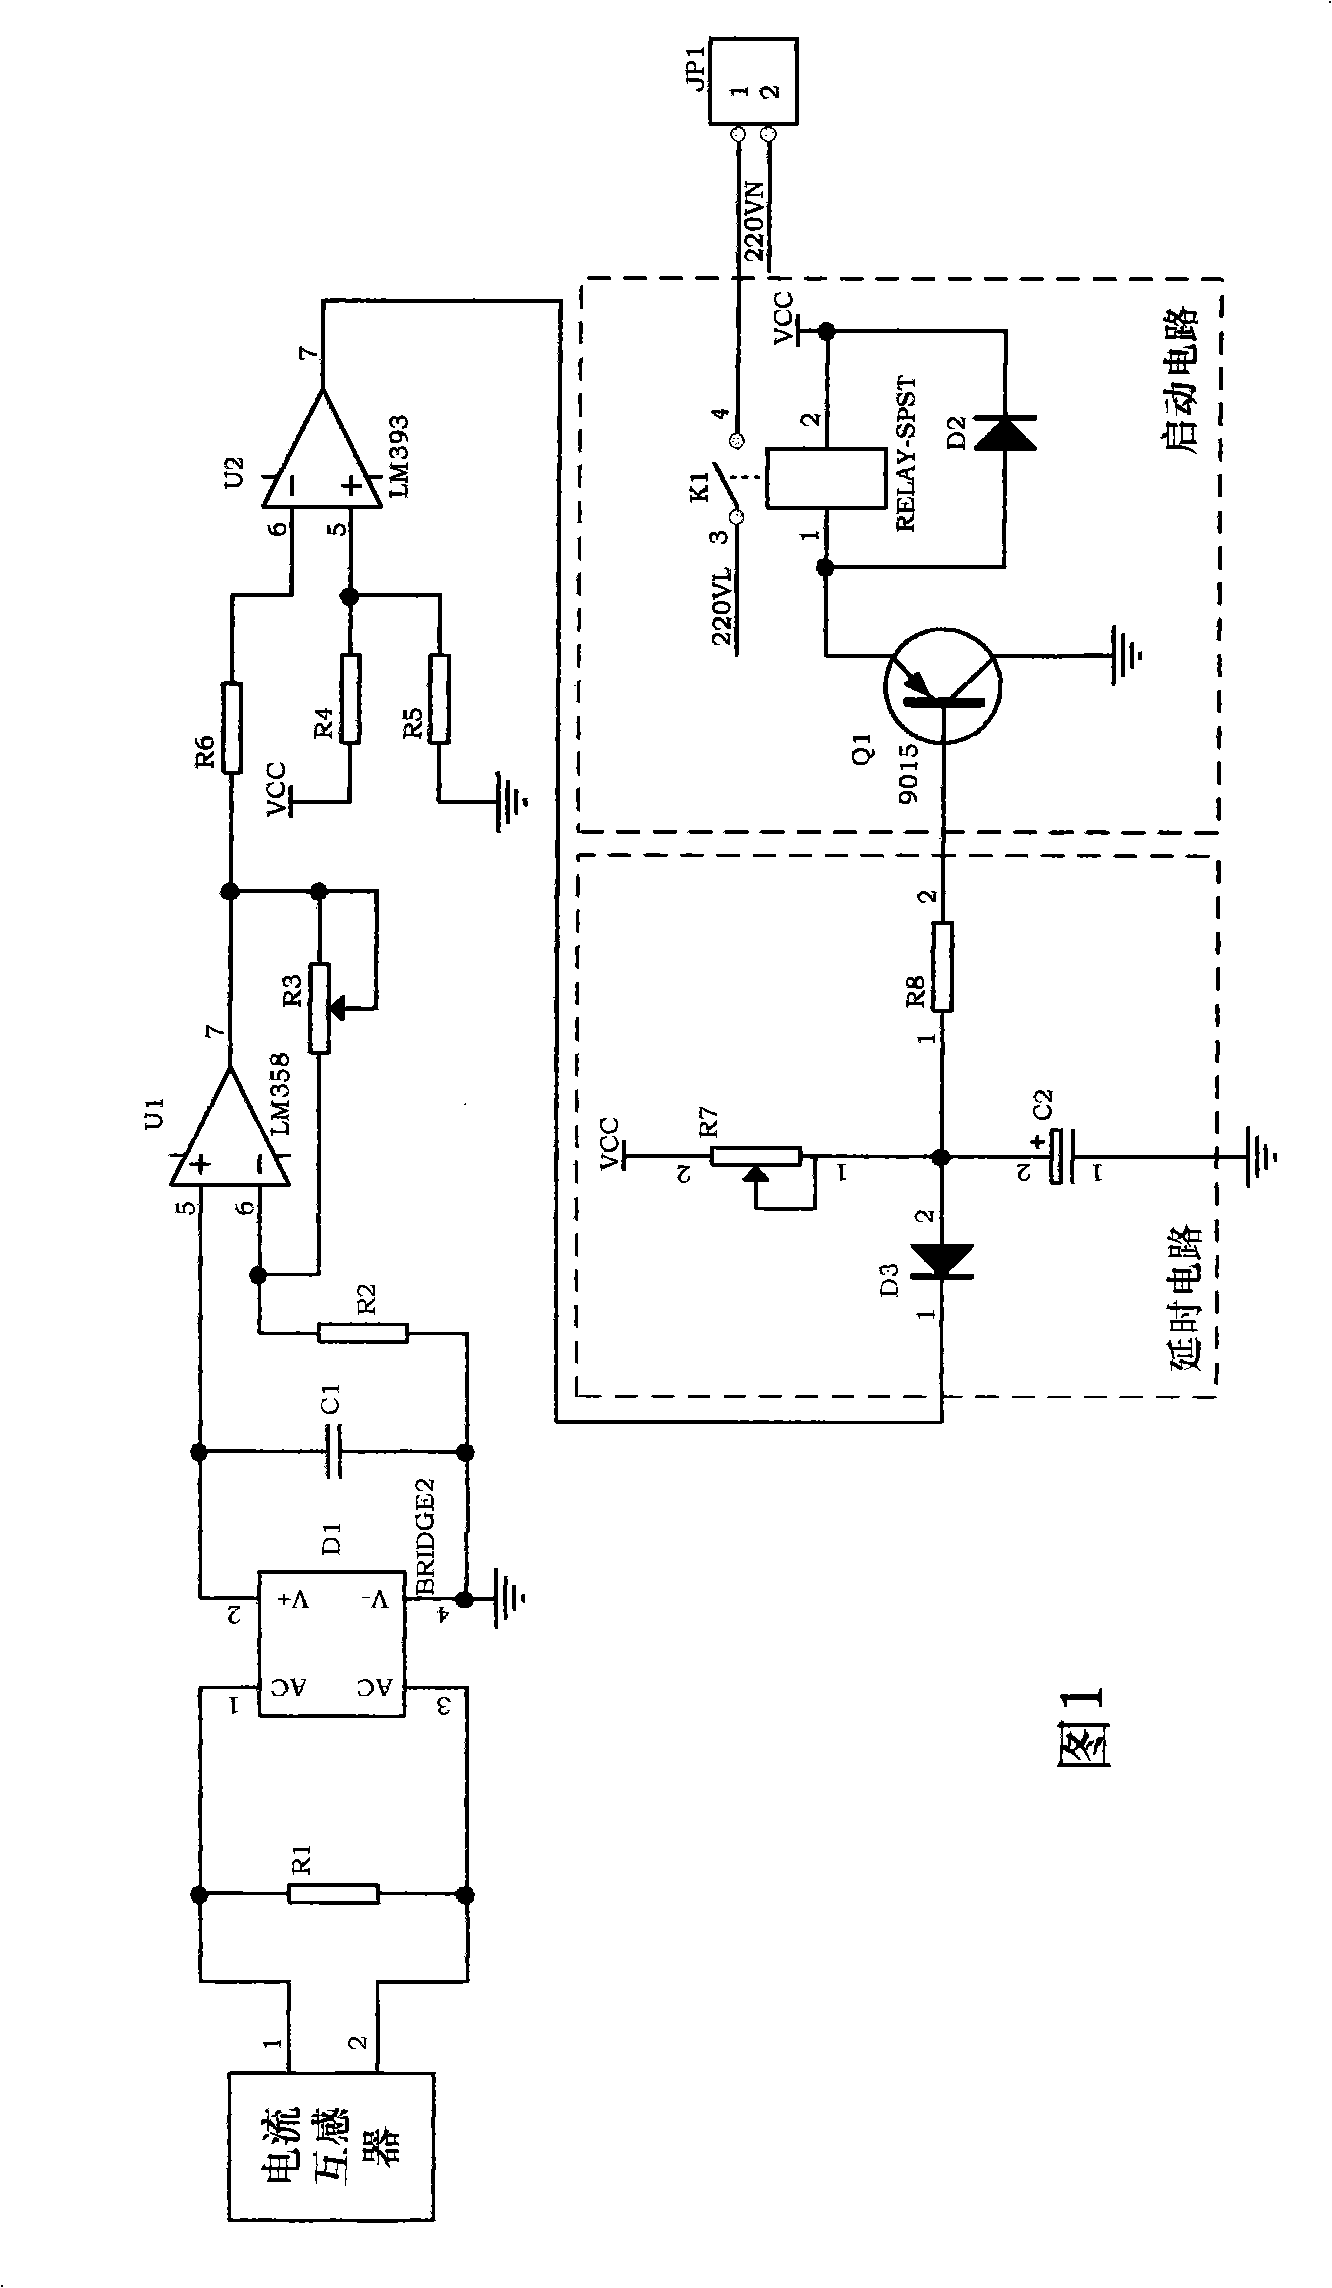 Automatic detection start device for starting fume cleaning system